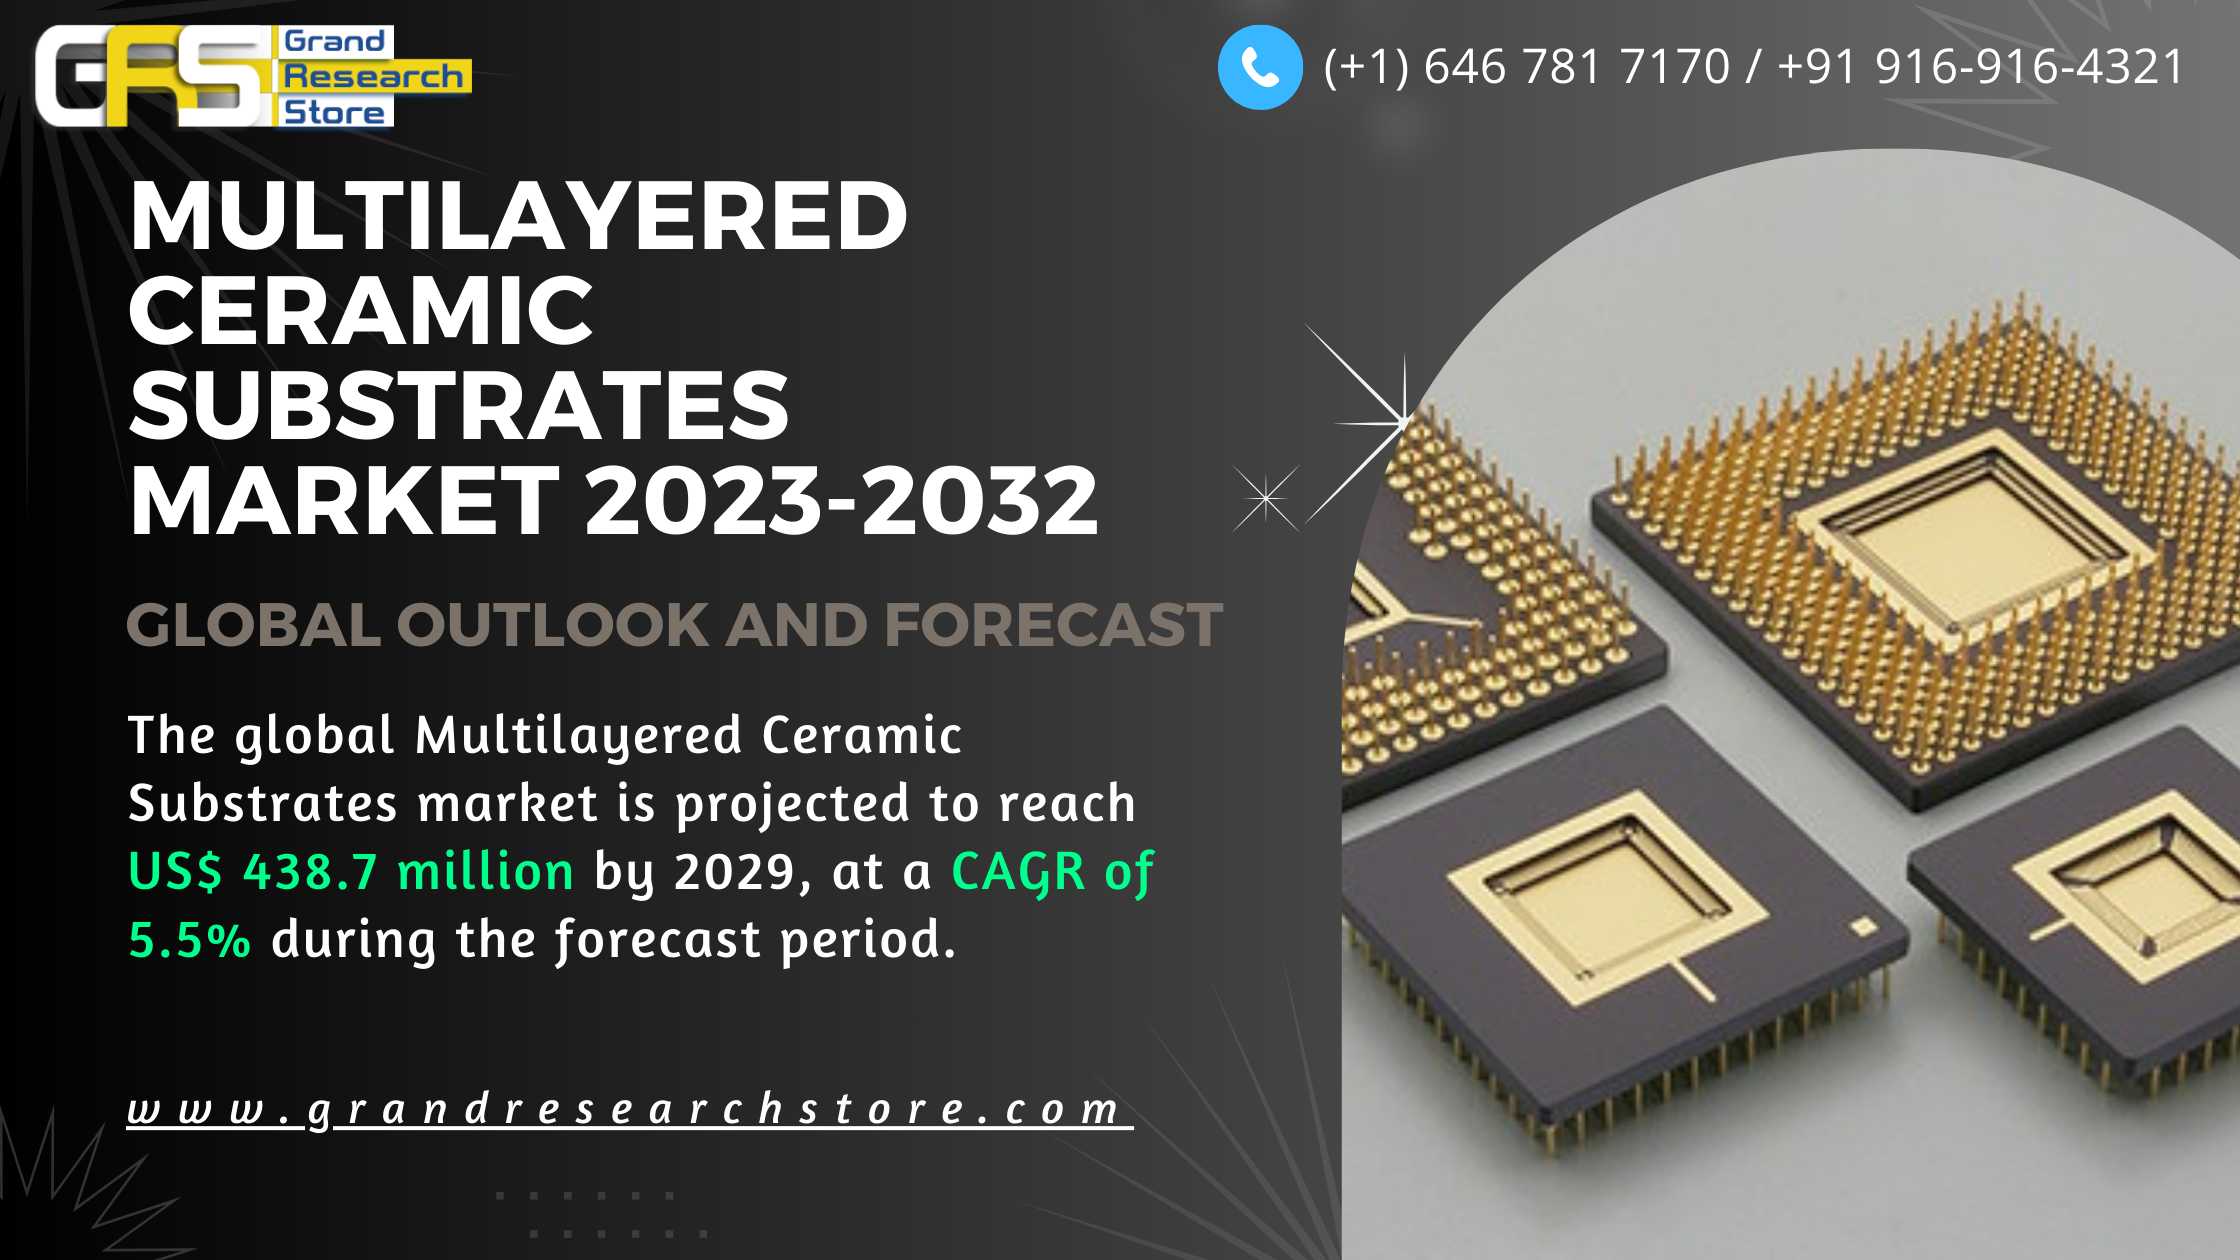 Multilayered Ceramic Substrates Market, Global Out..